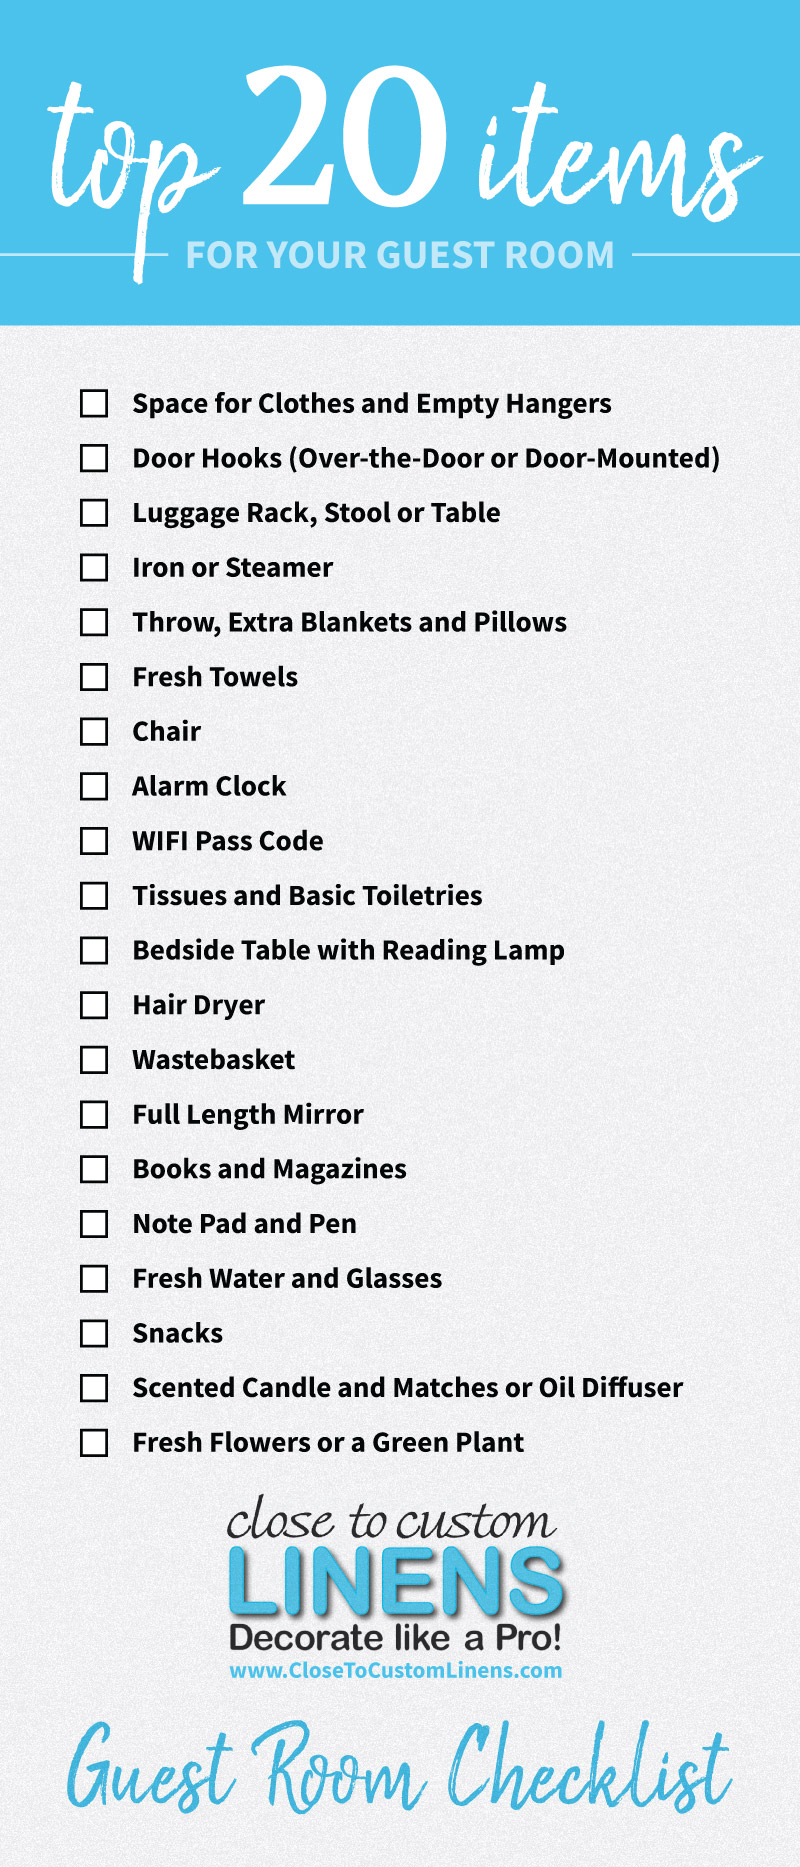 guest-room-checklist-top-20-items-to-include-when-decorating-a-spare